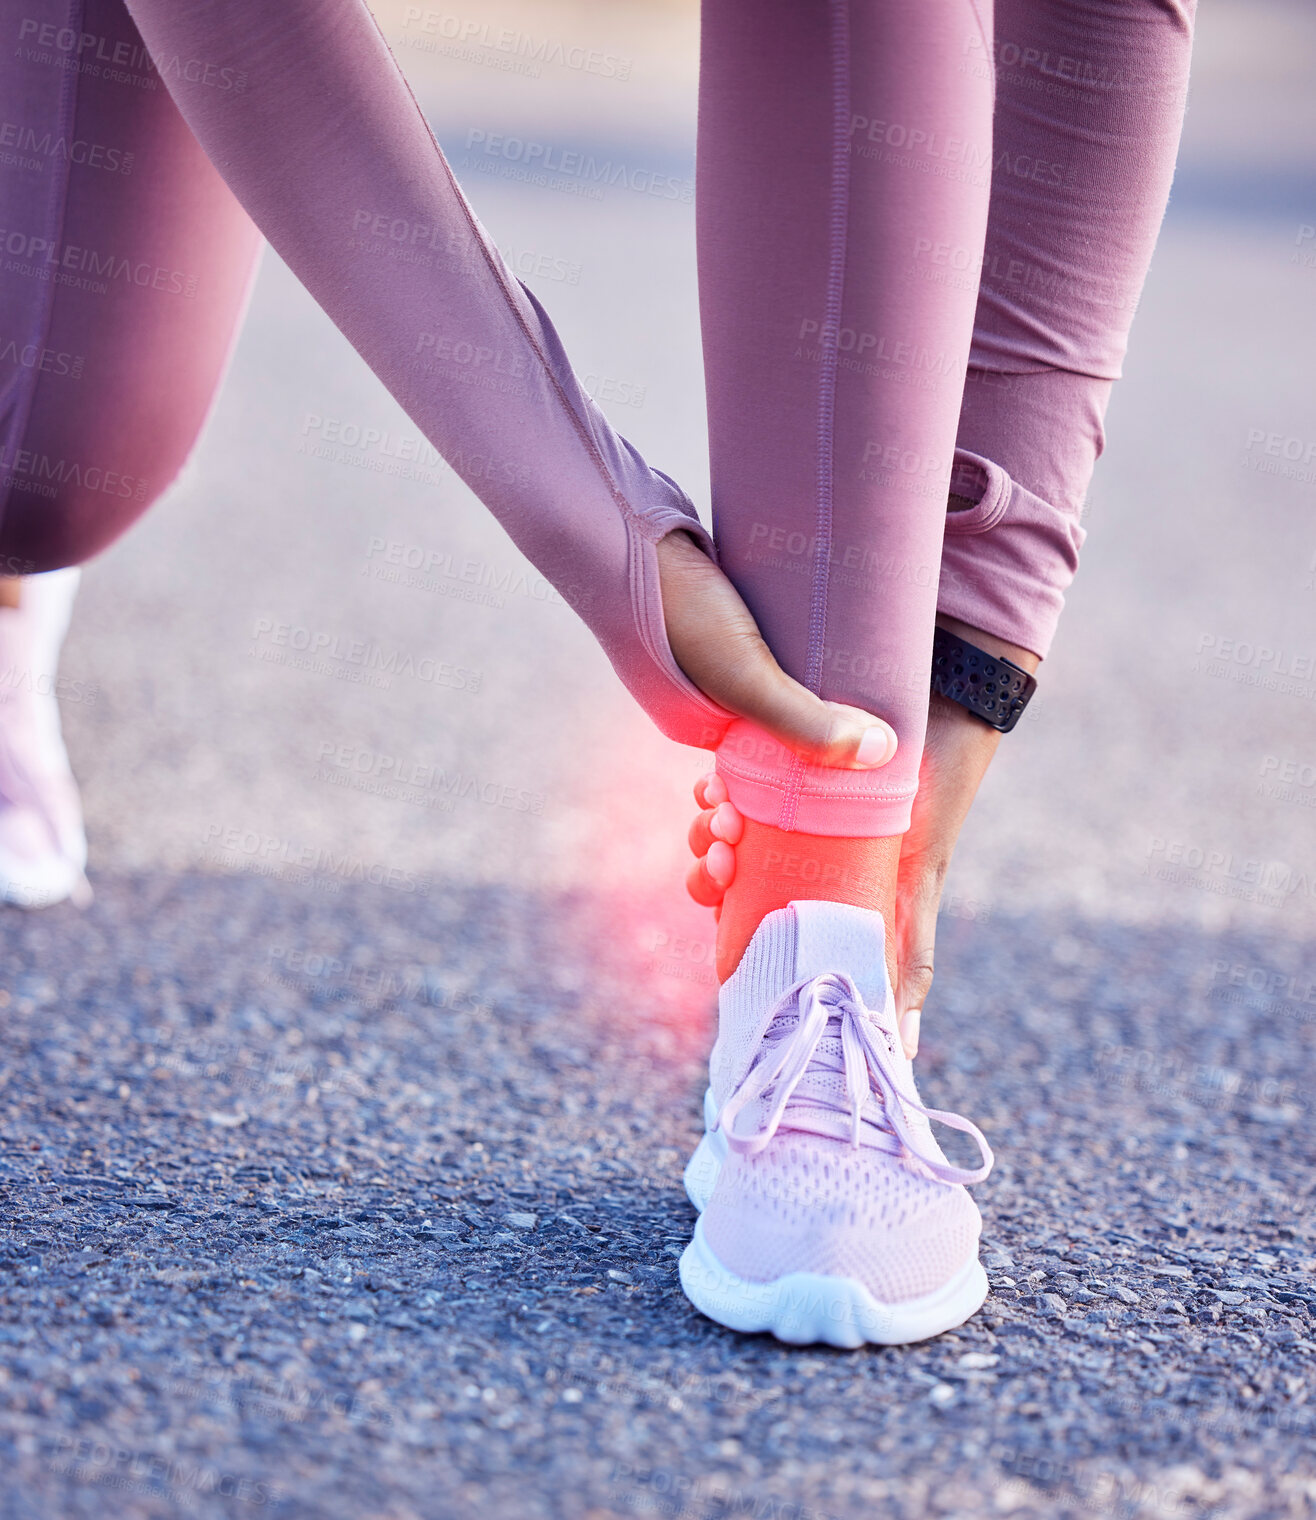 Buy stock photo Ankle hands, pain and fitness injury on road or street outdoors after accident. Sports, training athlete and black woman with leg inflammation, fibromyalgia or broken bones after exercise or workout.